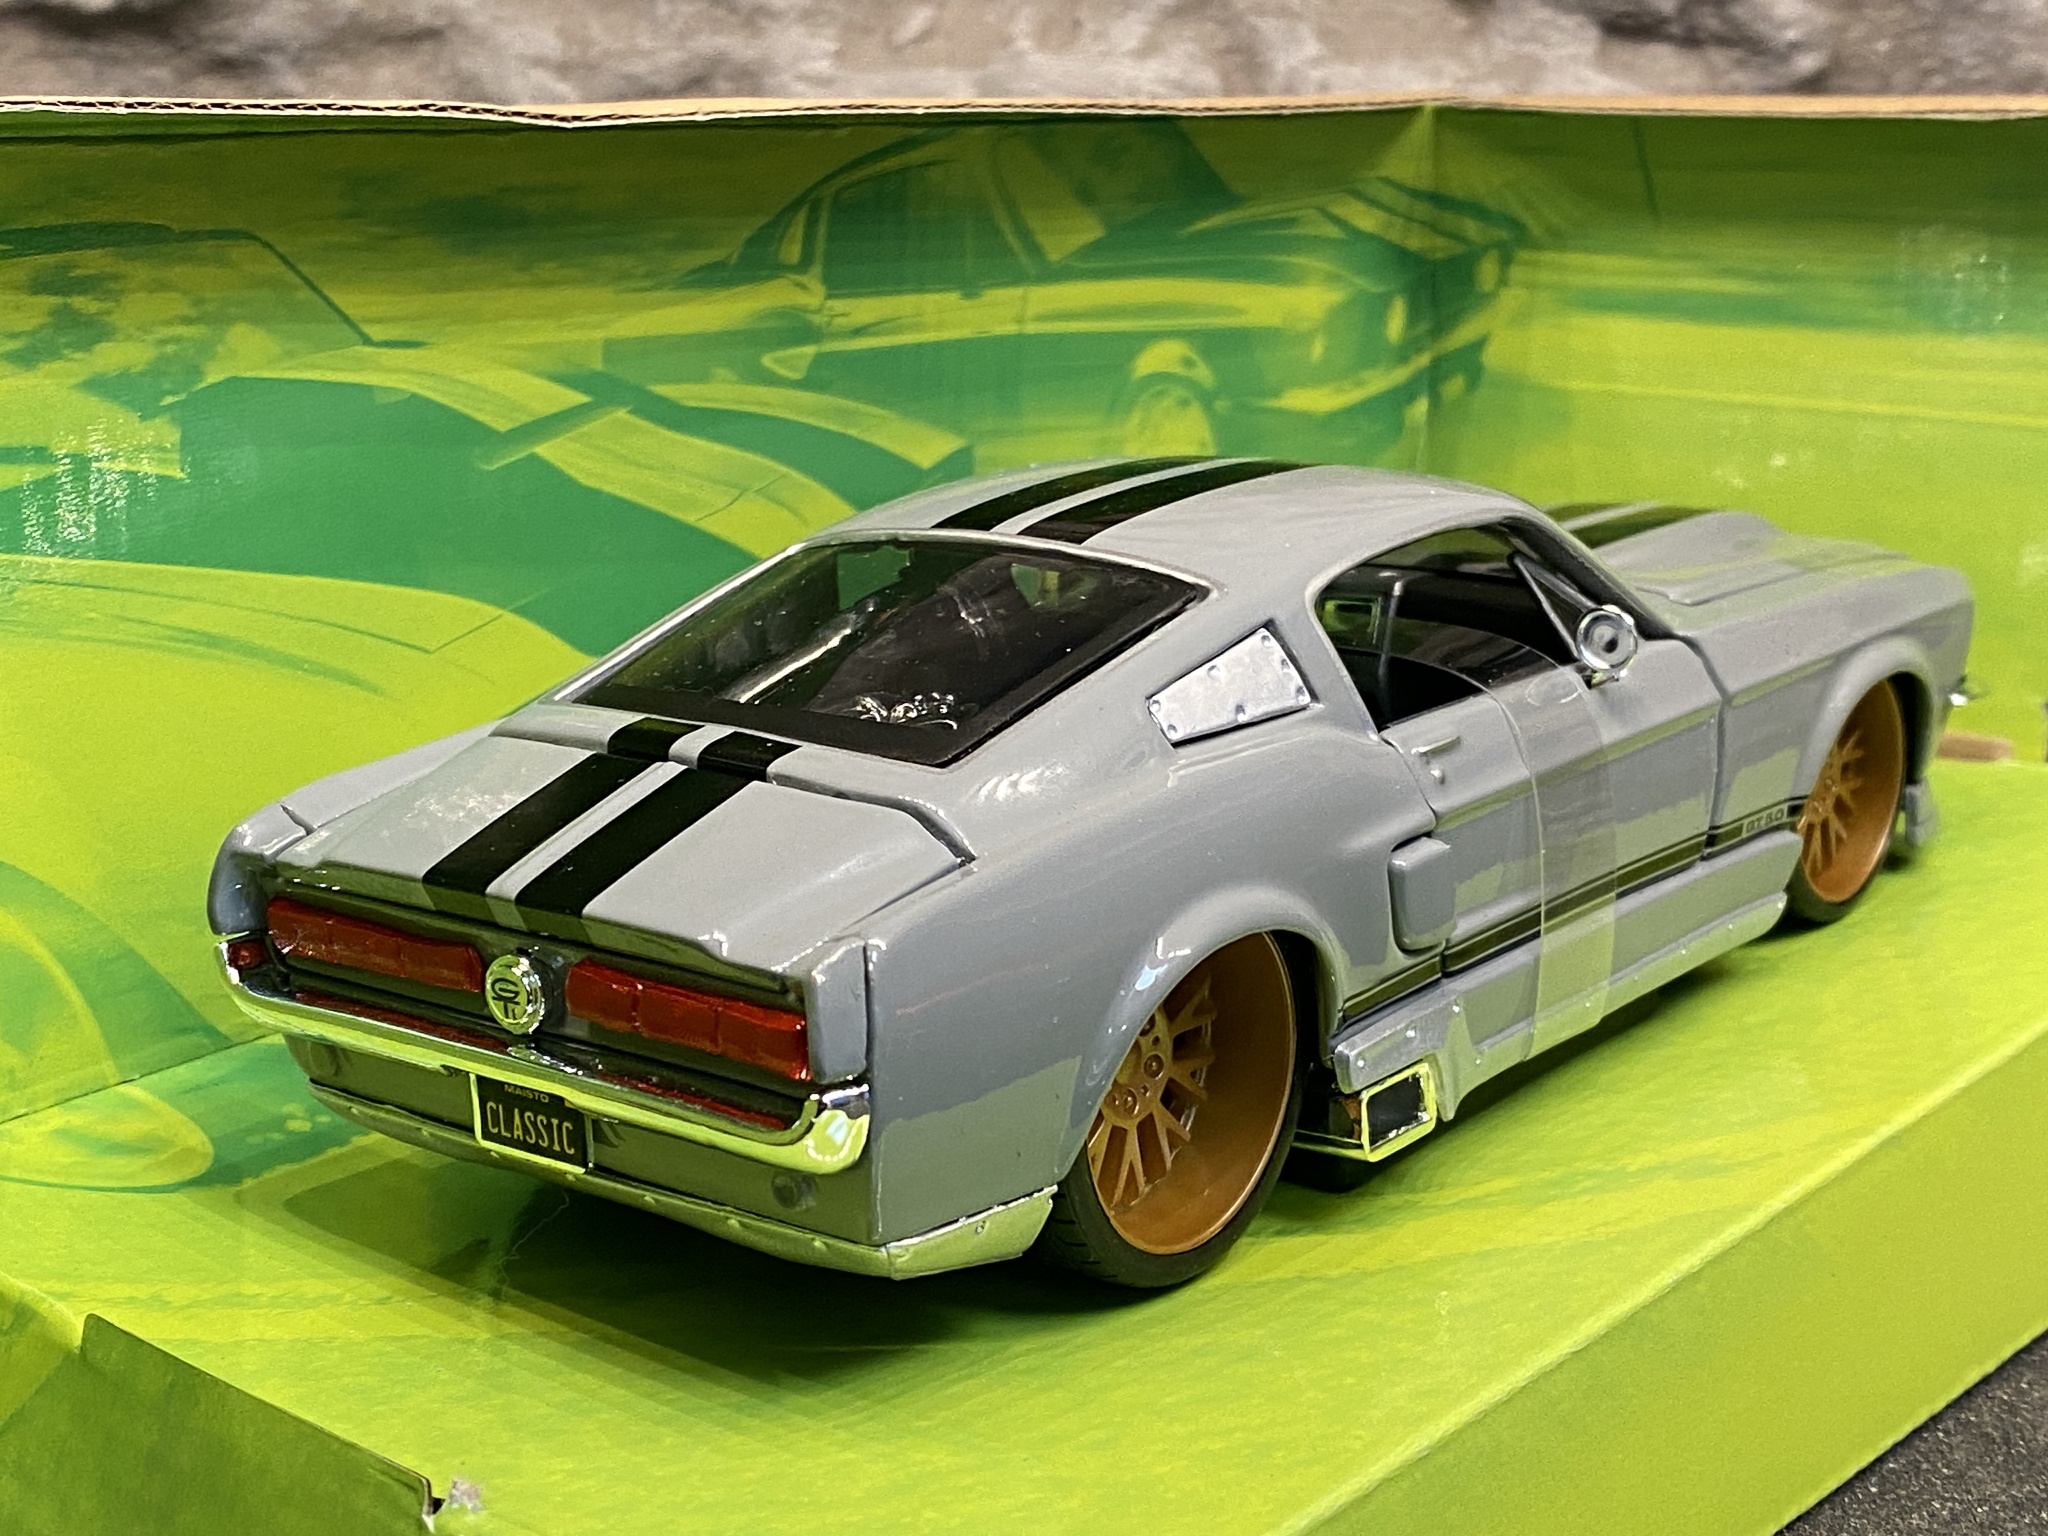 Skala 1/24 Ford Mustang GT 67', Grå/silver, Maisto Design "Classic Muscle"